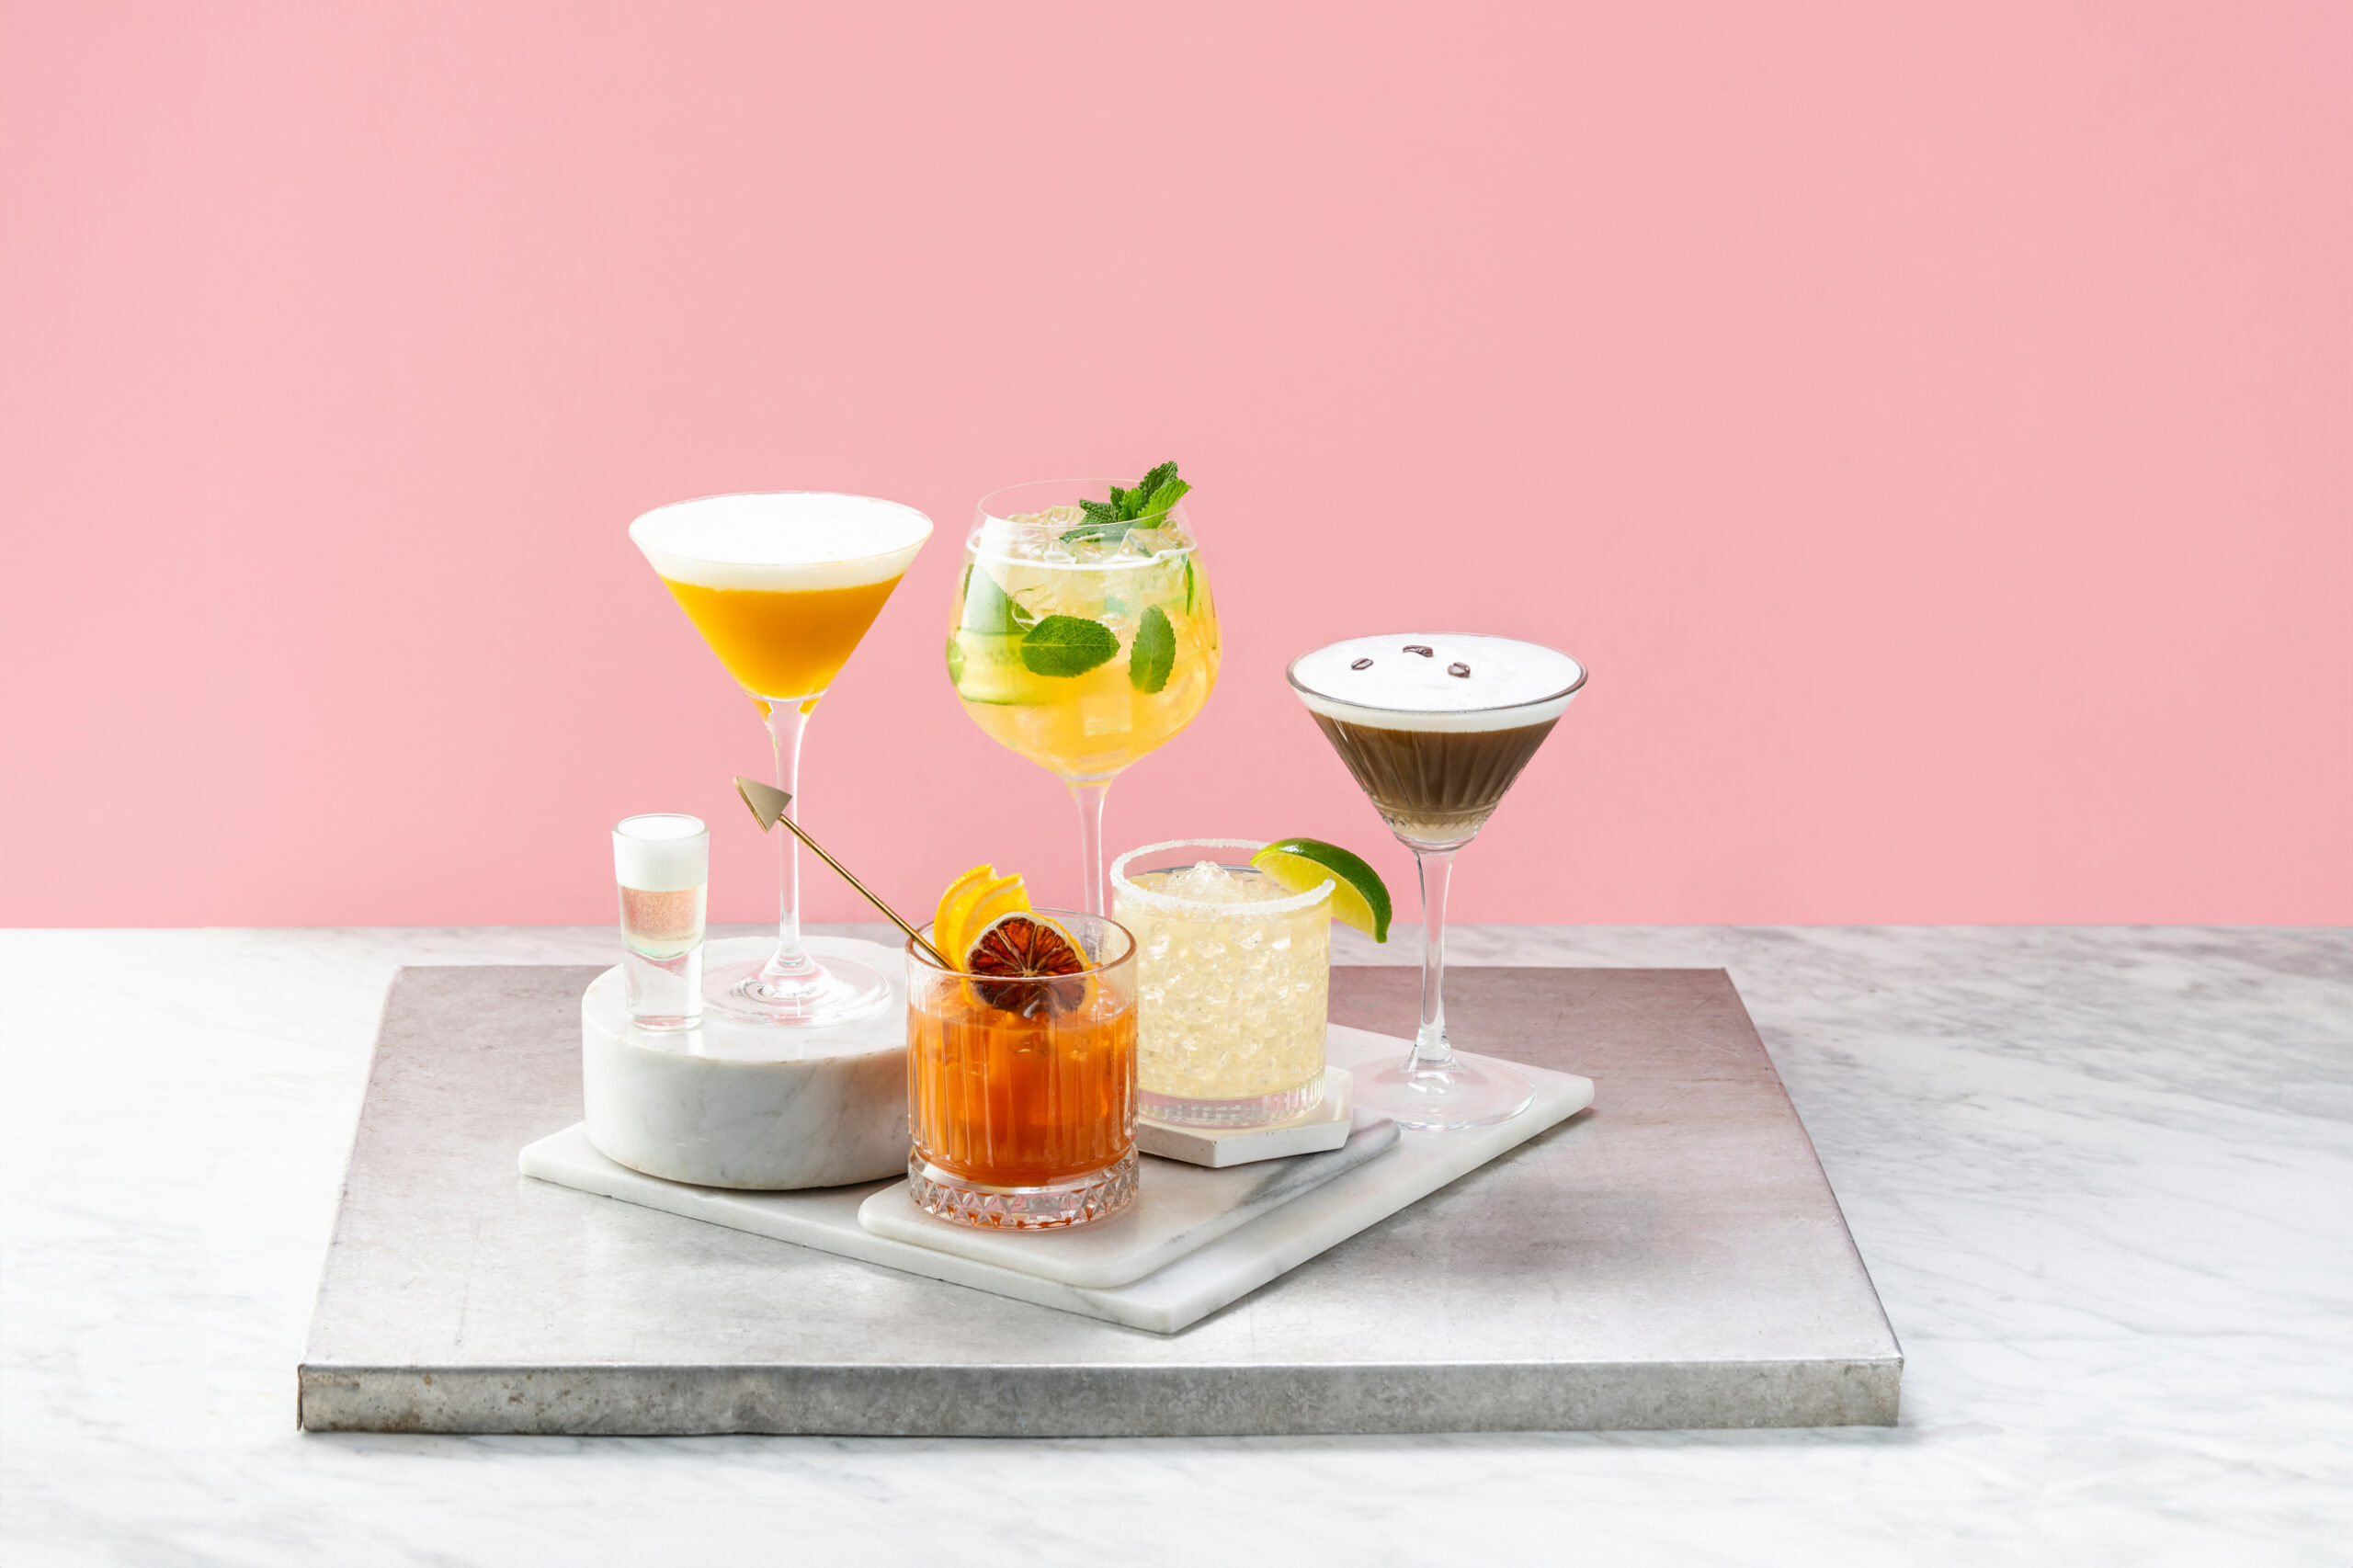 https://www.drakeandmorgan.co.uk/the-sipping-room/wp-content/uploads/2020/07/Cocktail-Grp-002-scaled.jpg